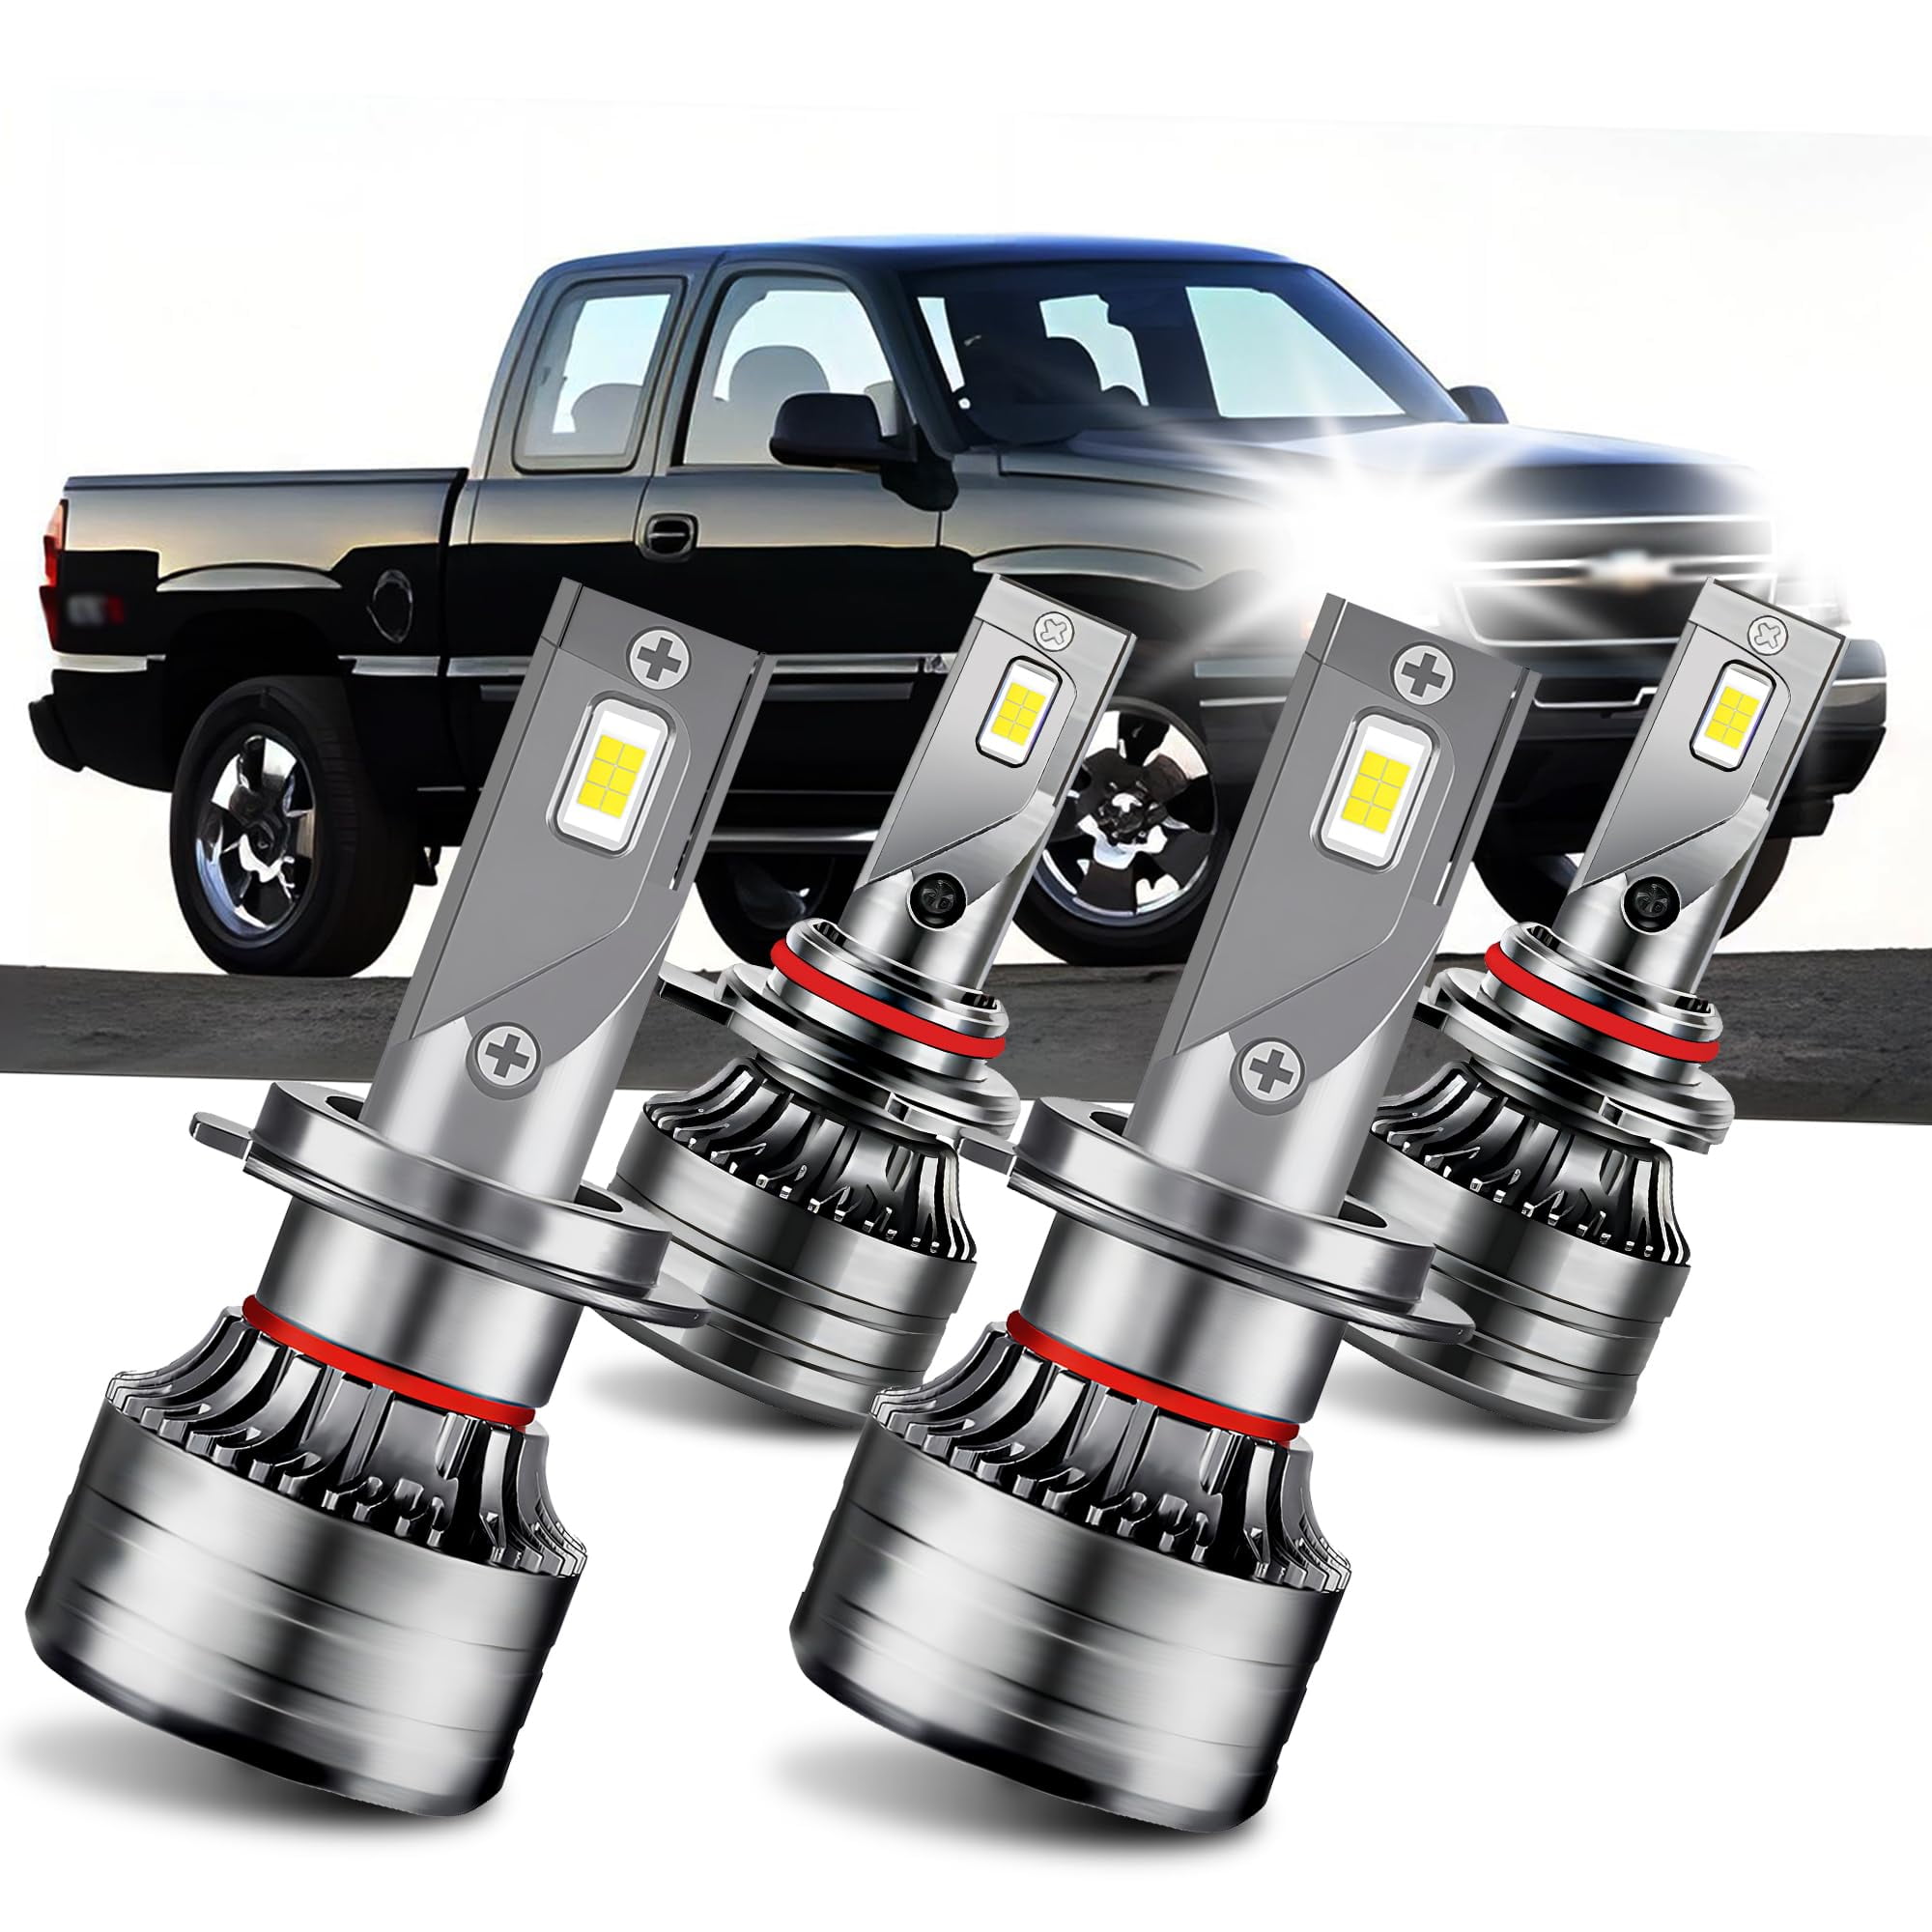 HUOKEDS for 19992006 Chevy RE32Silverado 1500 2500 3500HD LED Headlights  Lights Bulbs Combo 6000K Super Bright White High Low Beam Headlamps LED  Blubs